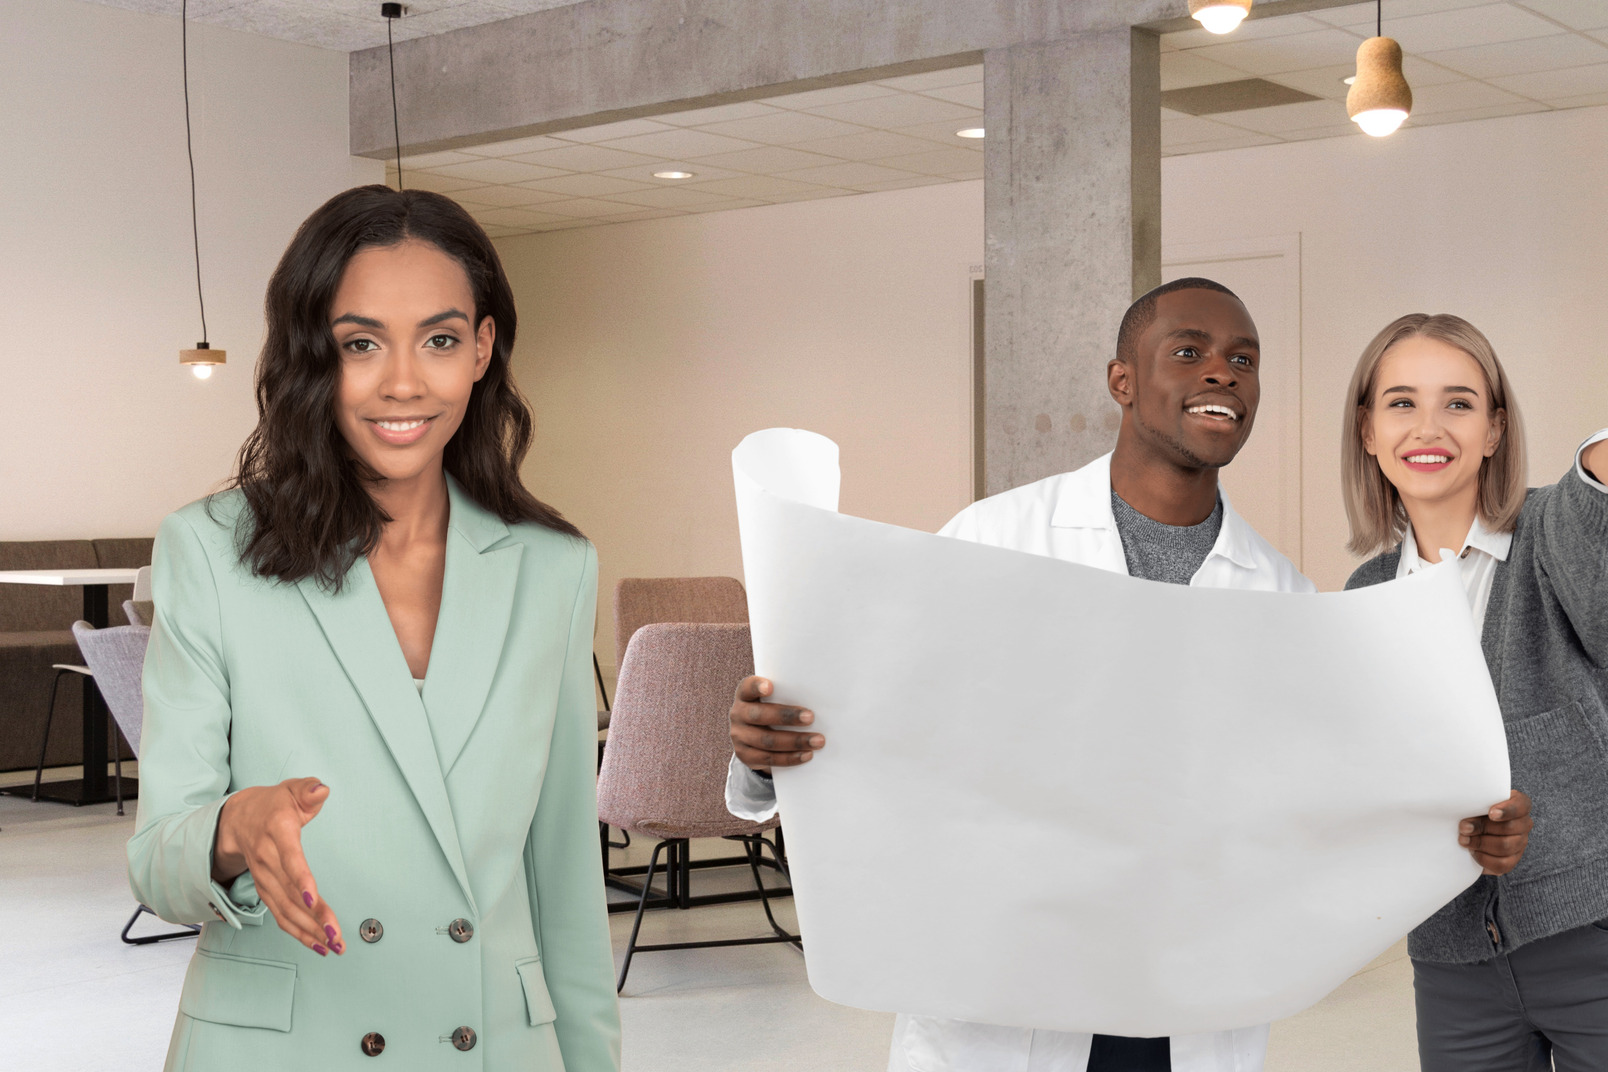 Man and woman holding a pillow in their office